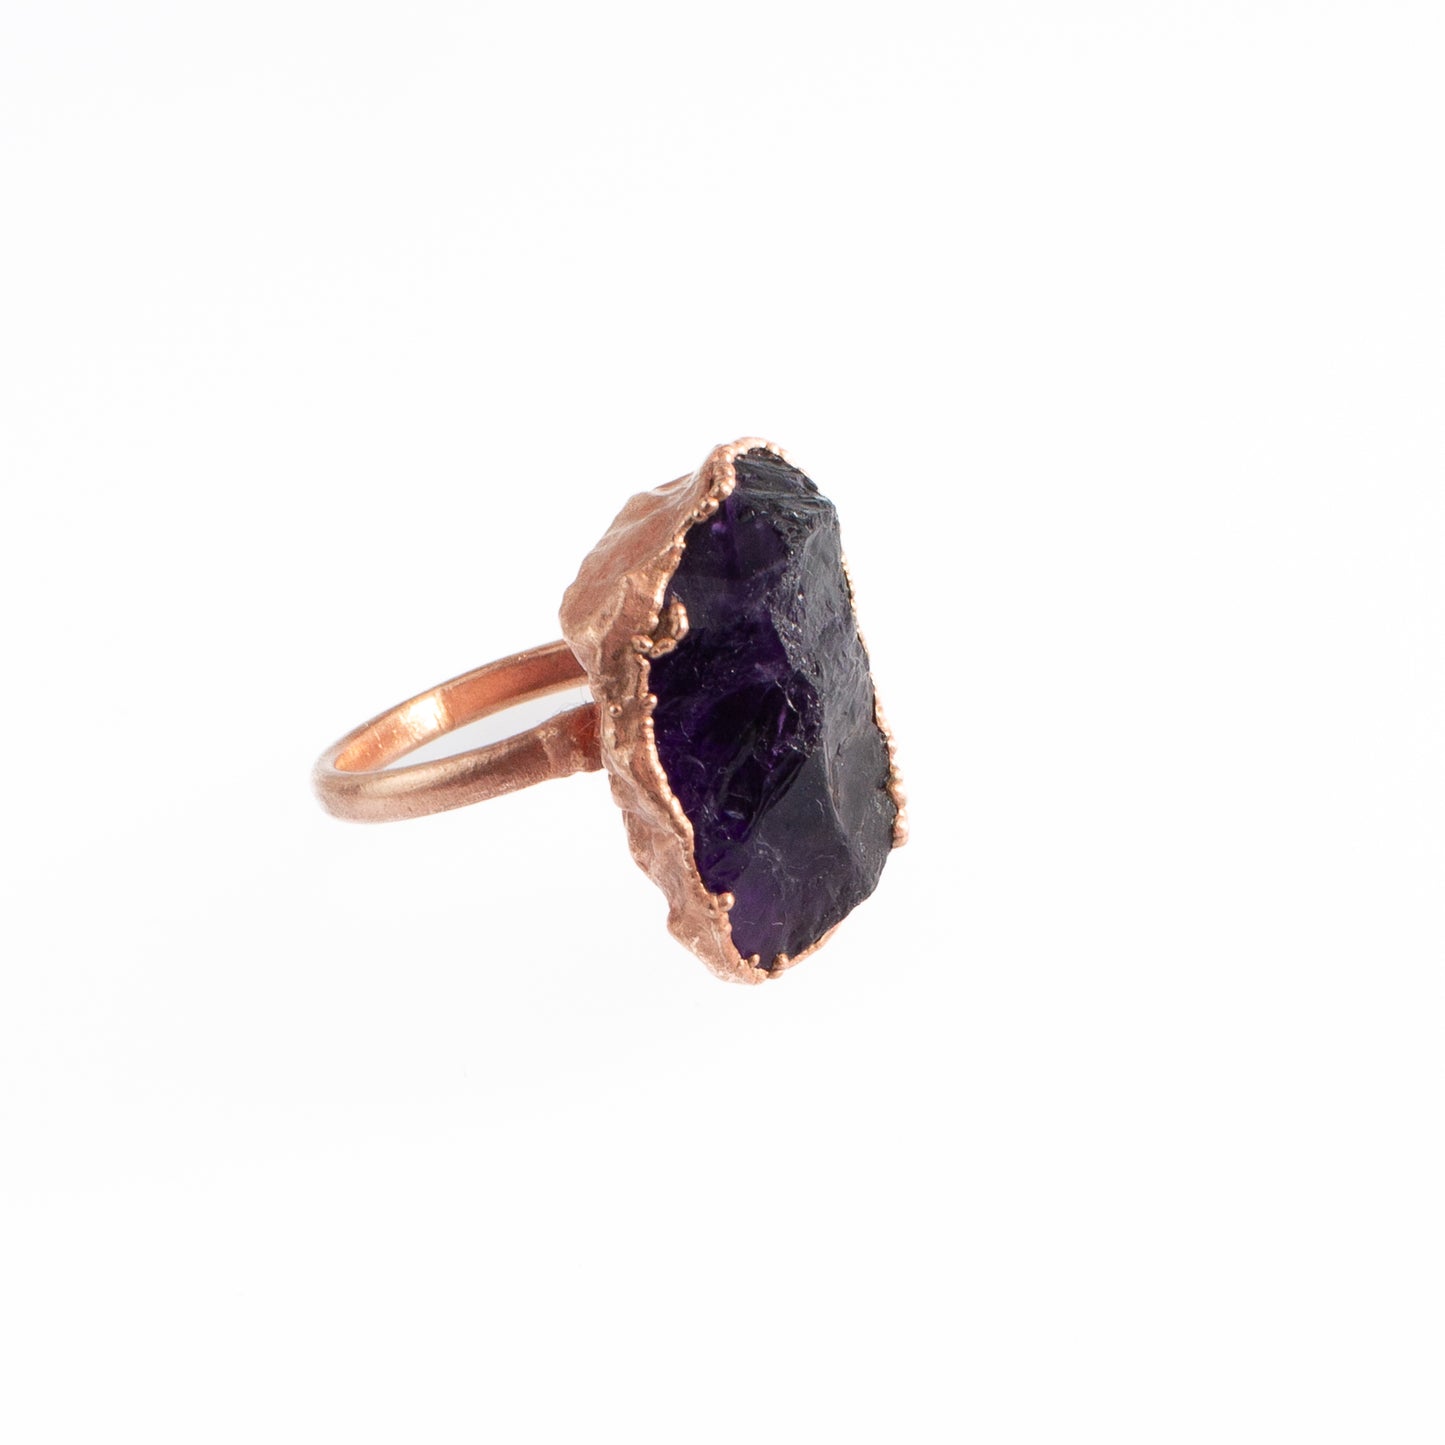 X Large Amethyst Ring, Vertical